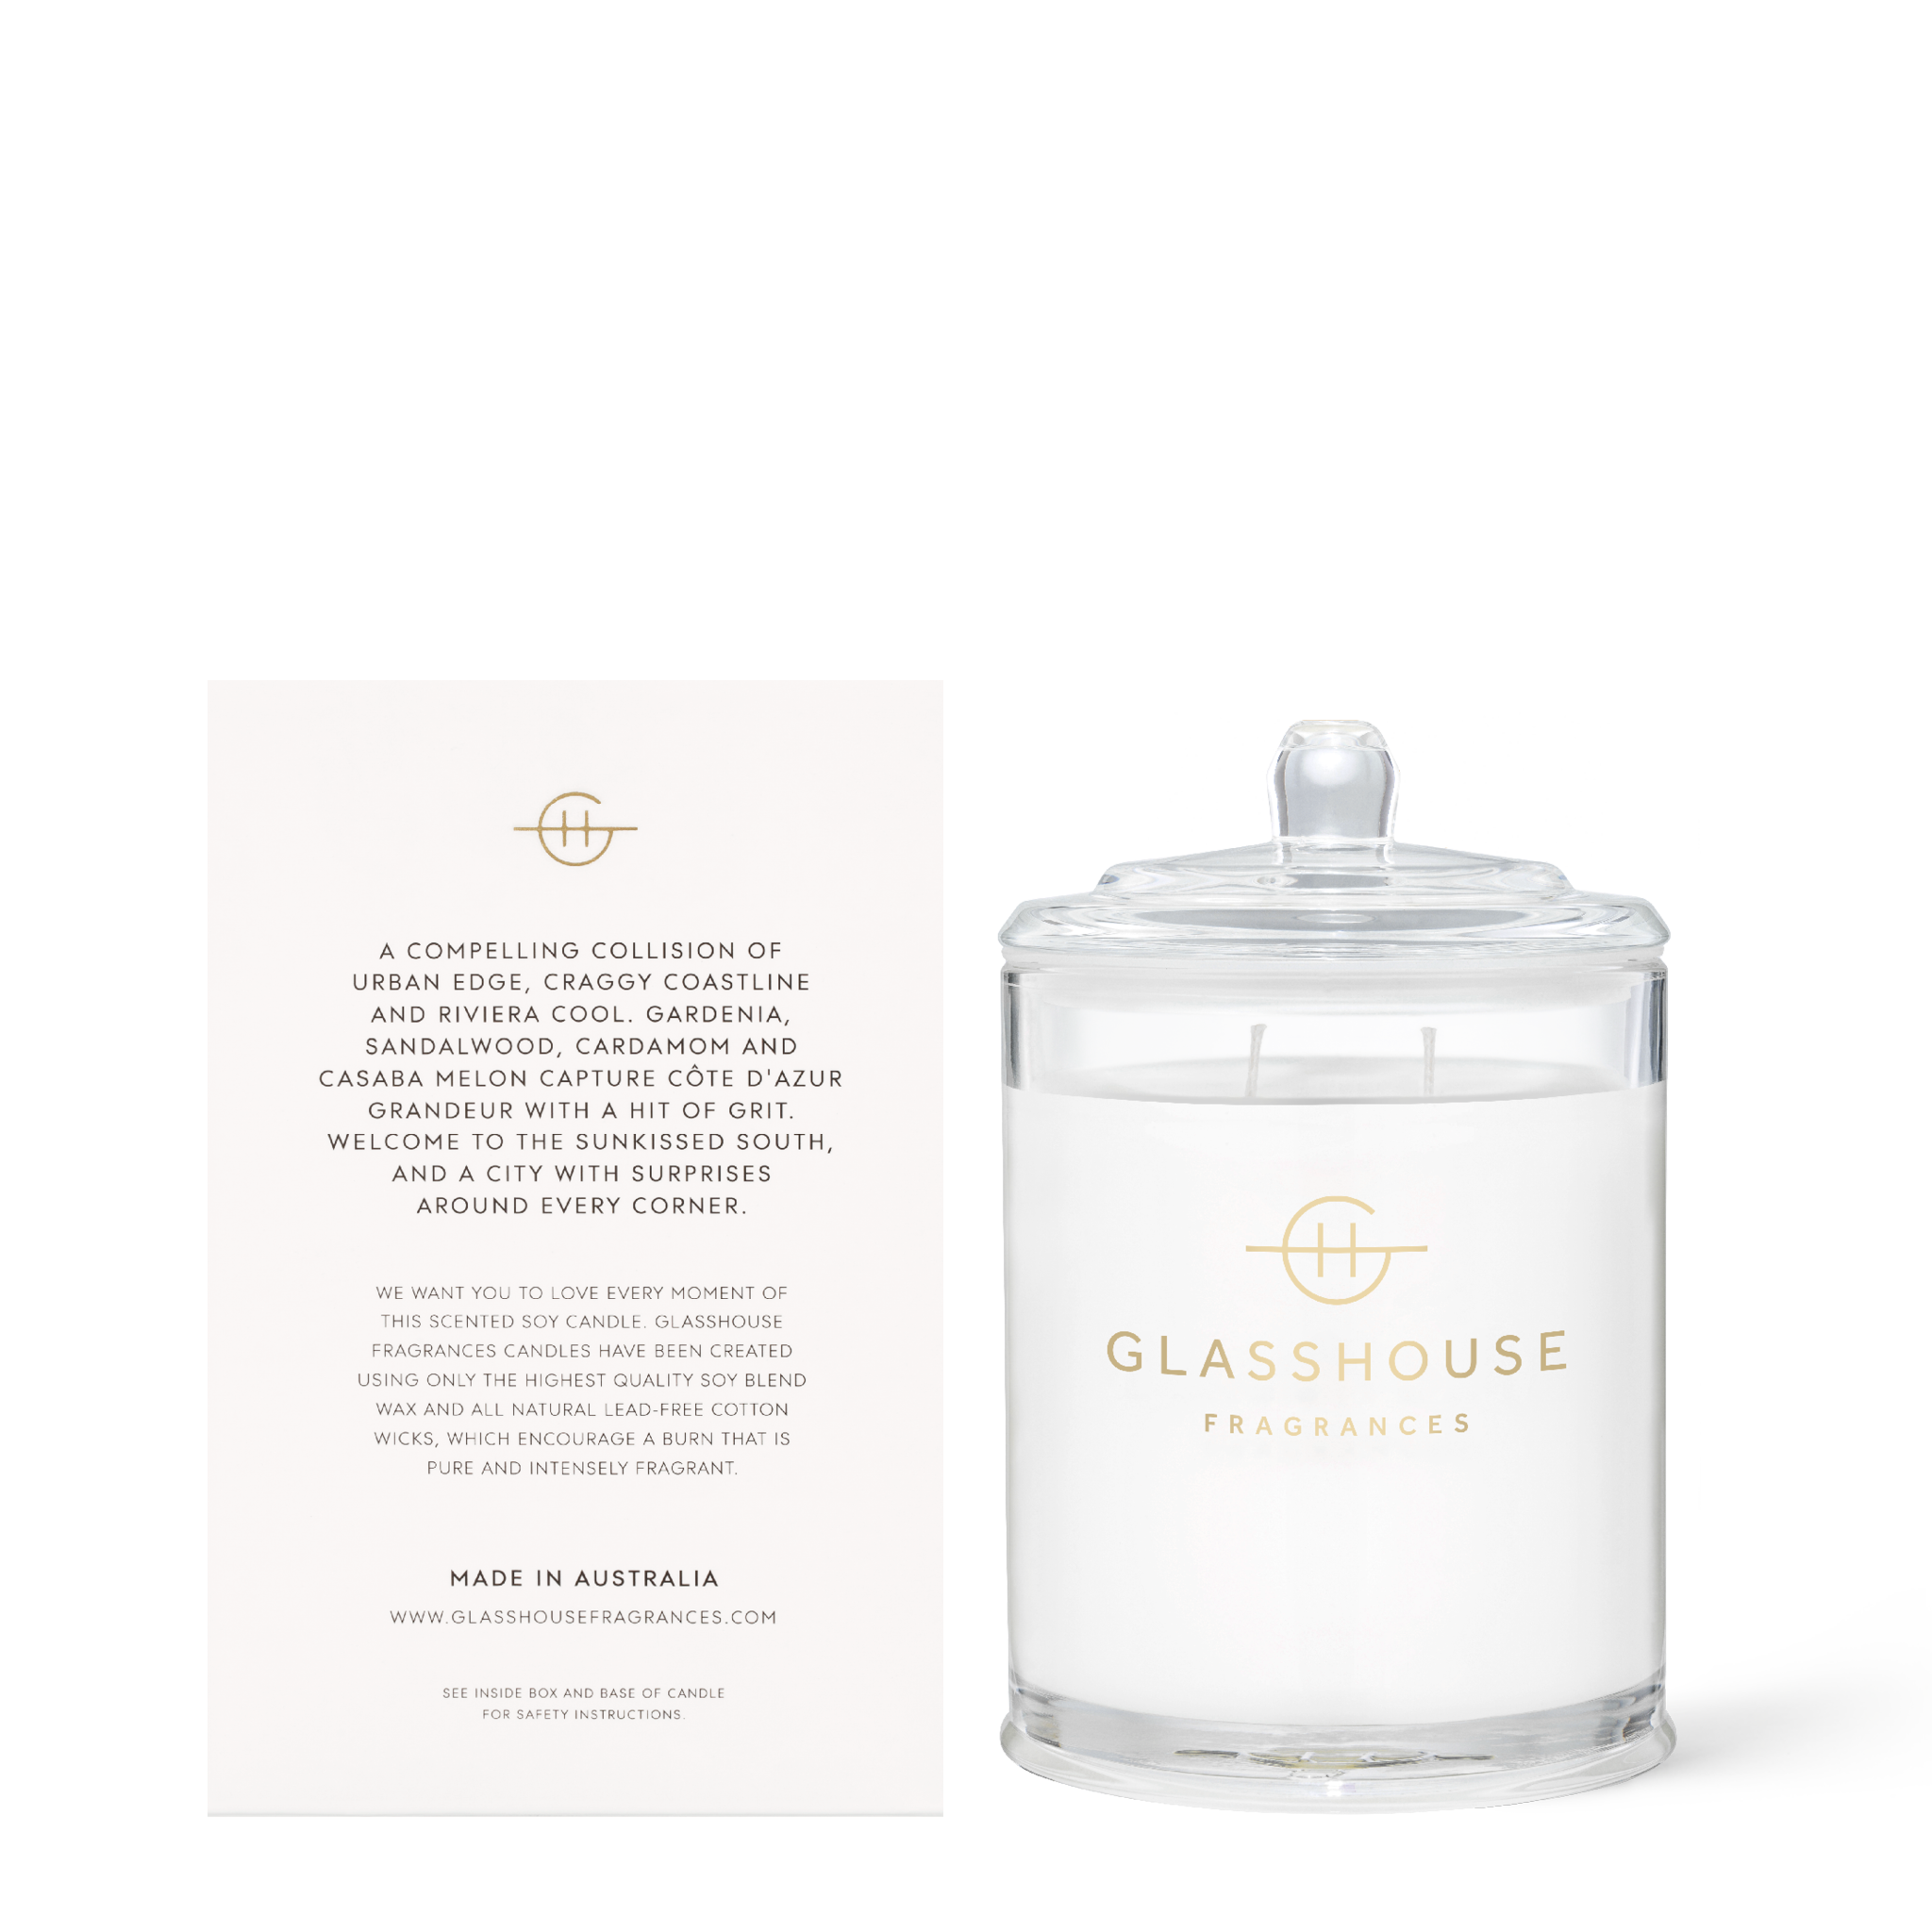 Glasshouse Fragrances Marseille Memoir Gardenia and Saffron 380g Soy Candle with box - back of product shot